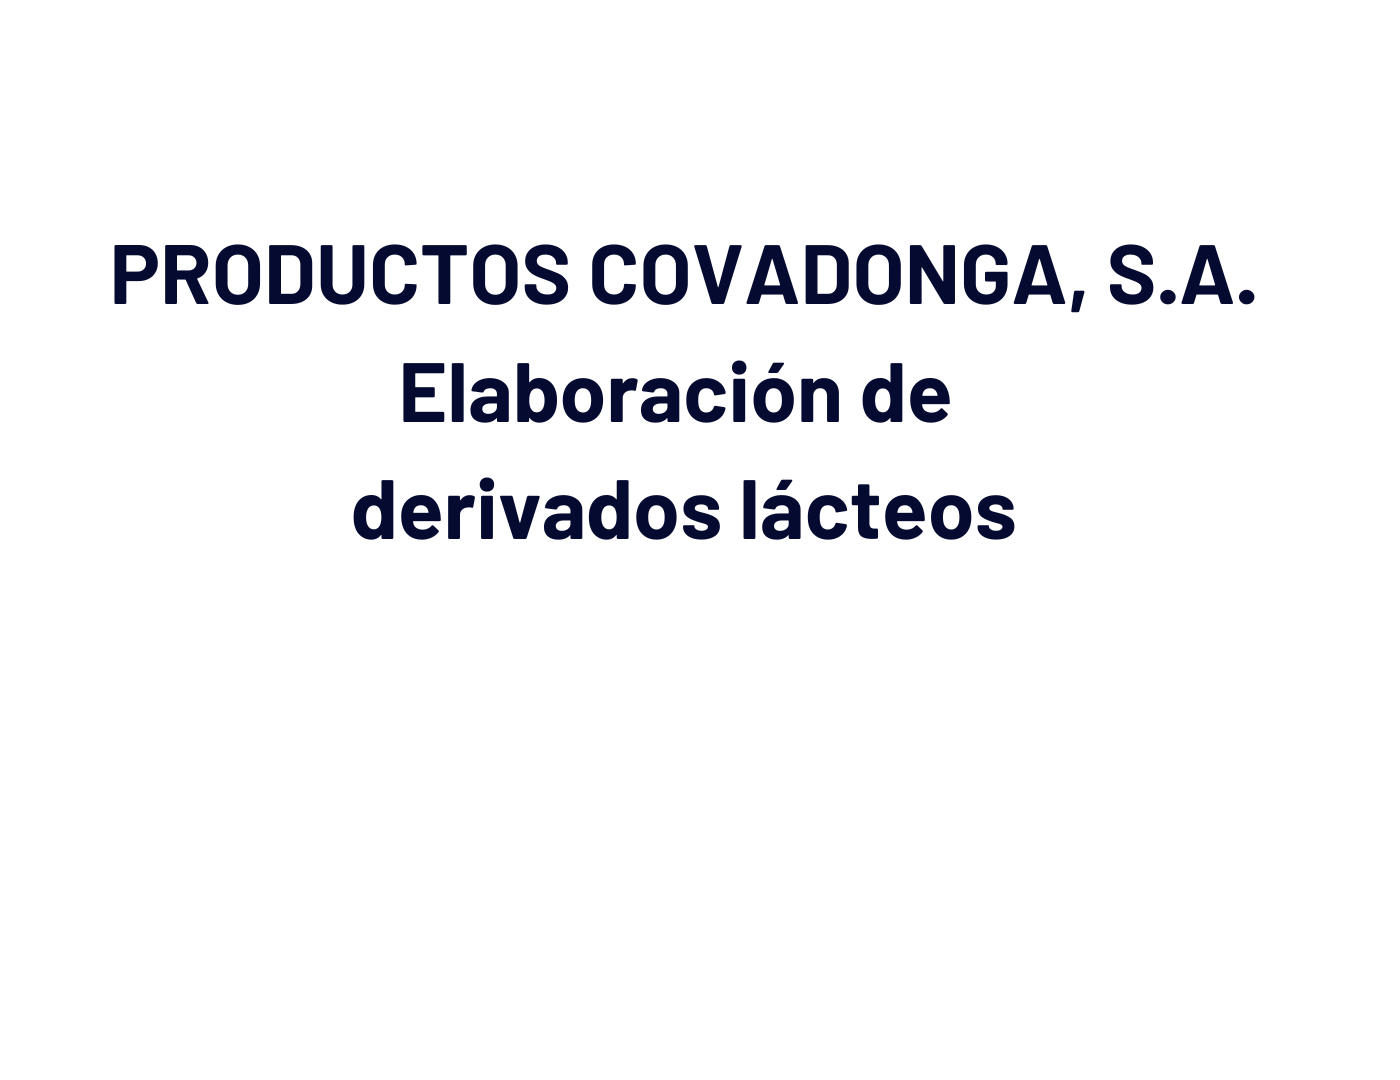 PRODUCTOS COVADONGA, S.A.